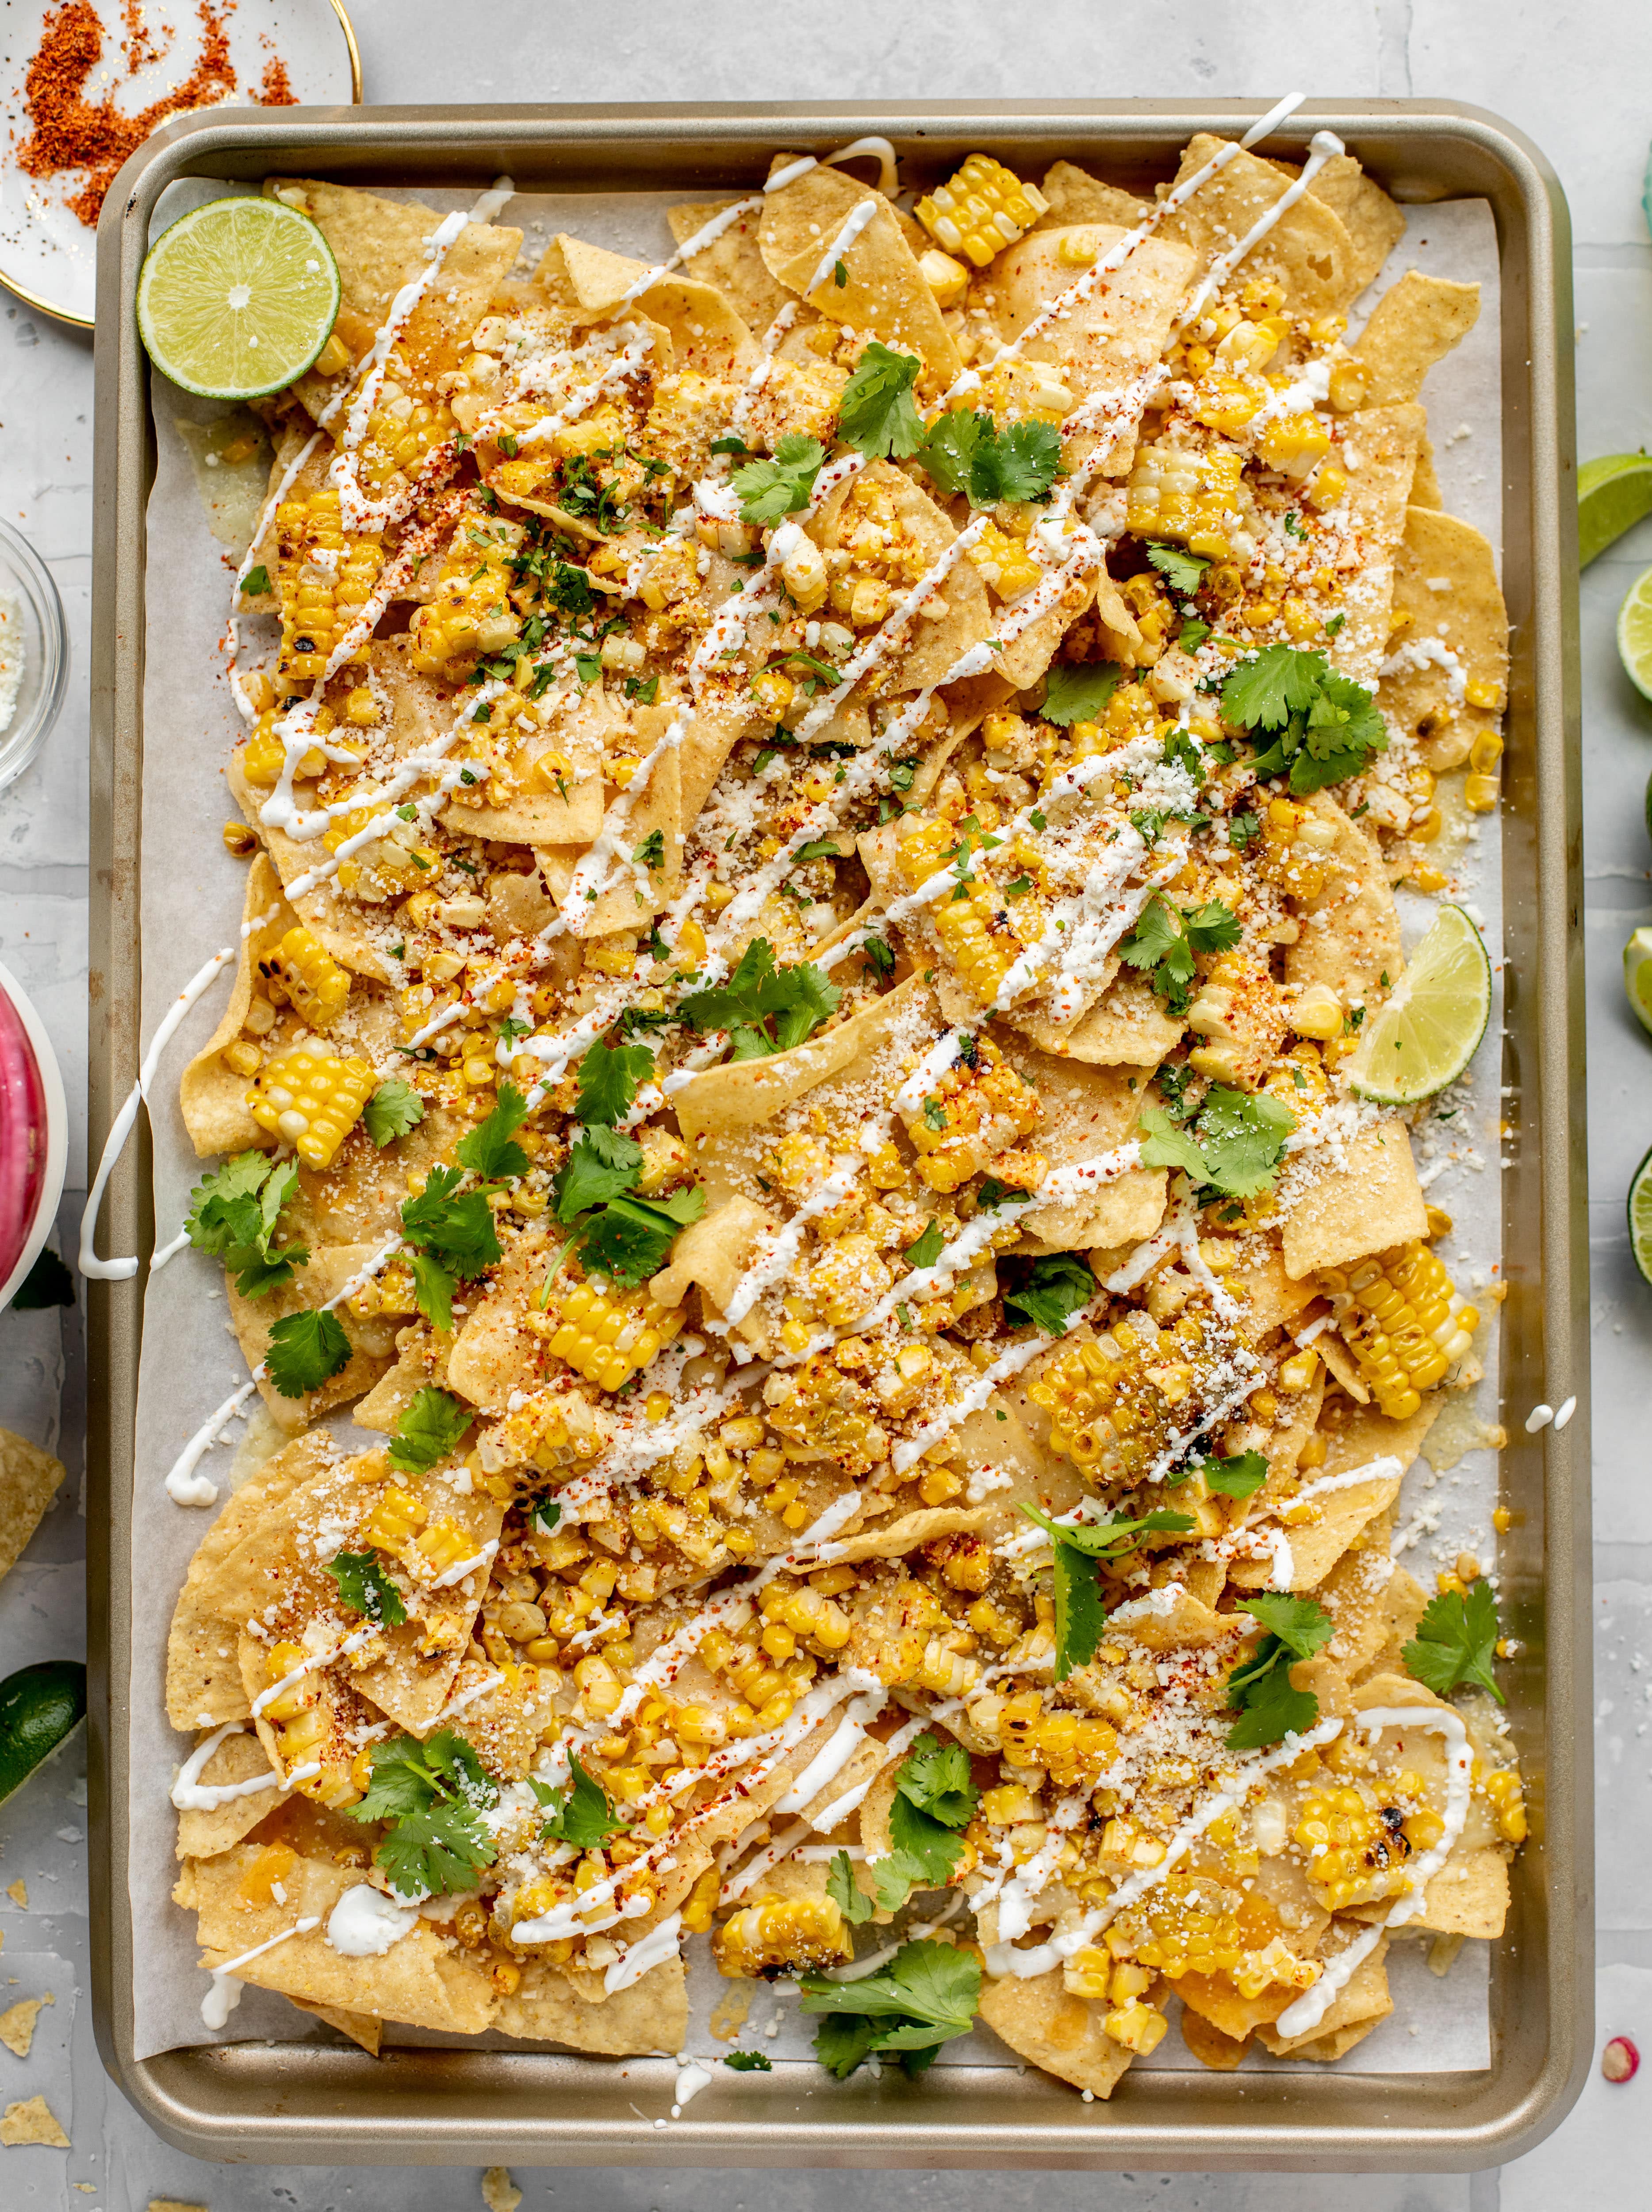 These sheet pan street corn nachos are ridiculously easy and delicious! Grilled corn, chili, lime, tons of cheese and all the flavor you could dream of!